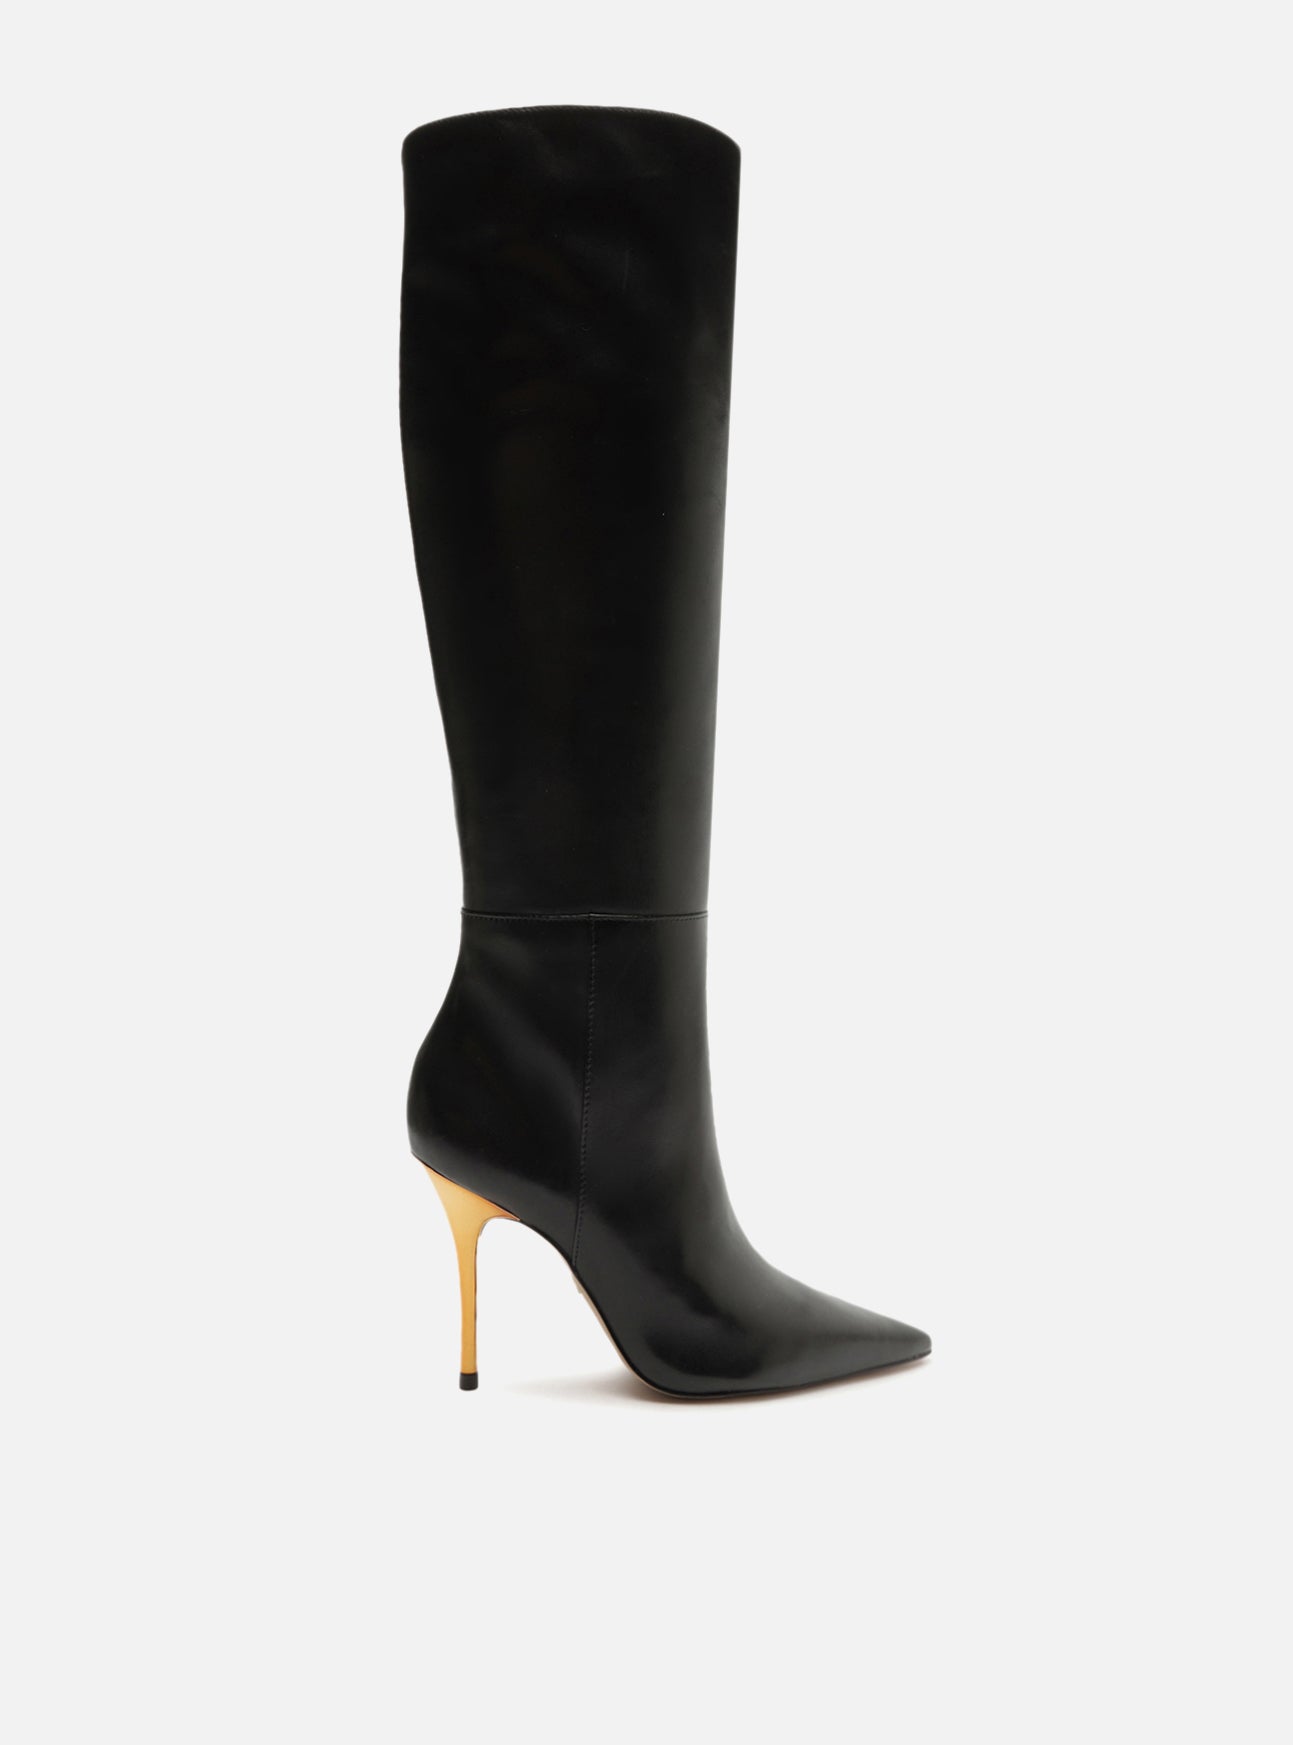 Black leather knee-high boot with high gold stiletto heels and a pointed toe. It has a tight upper part.